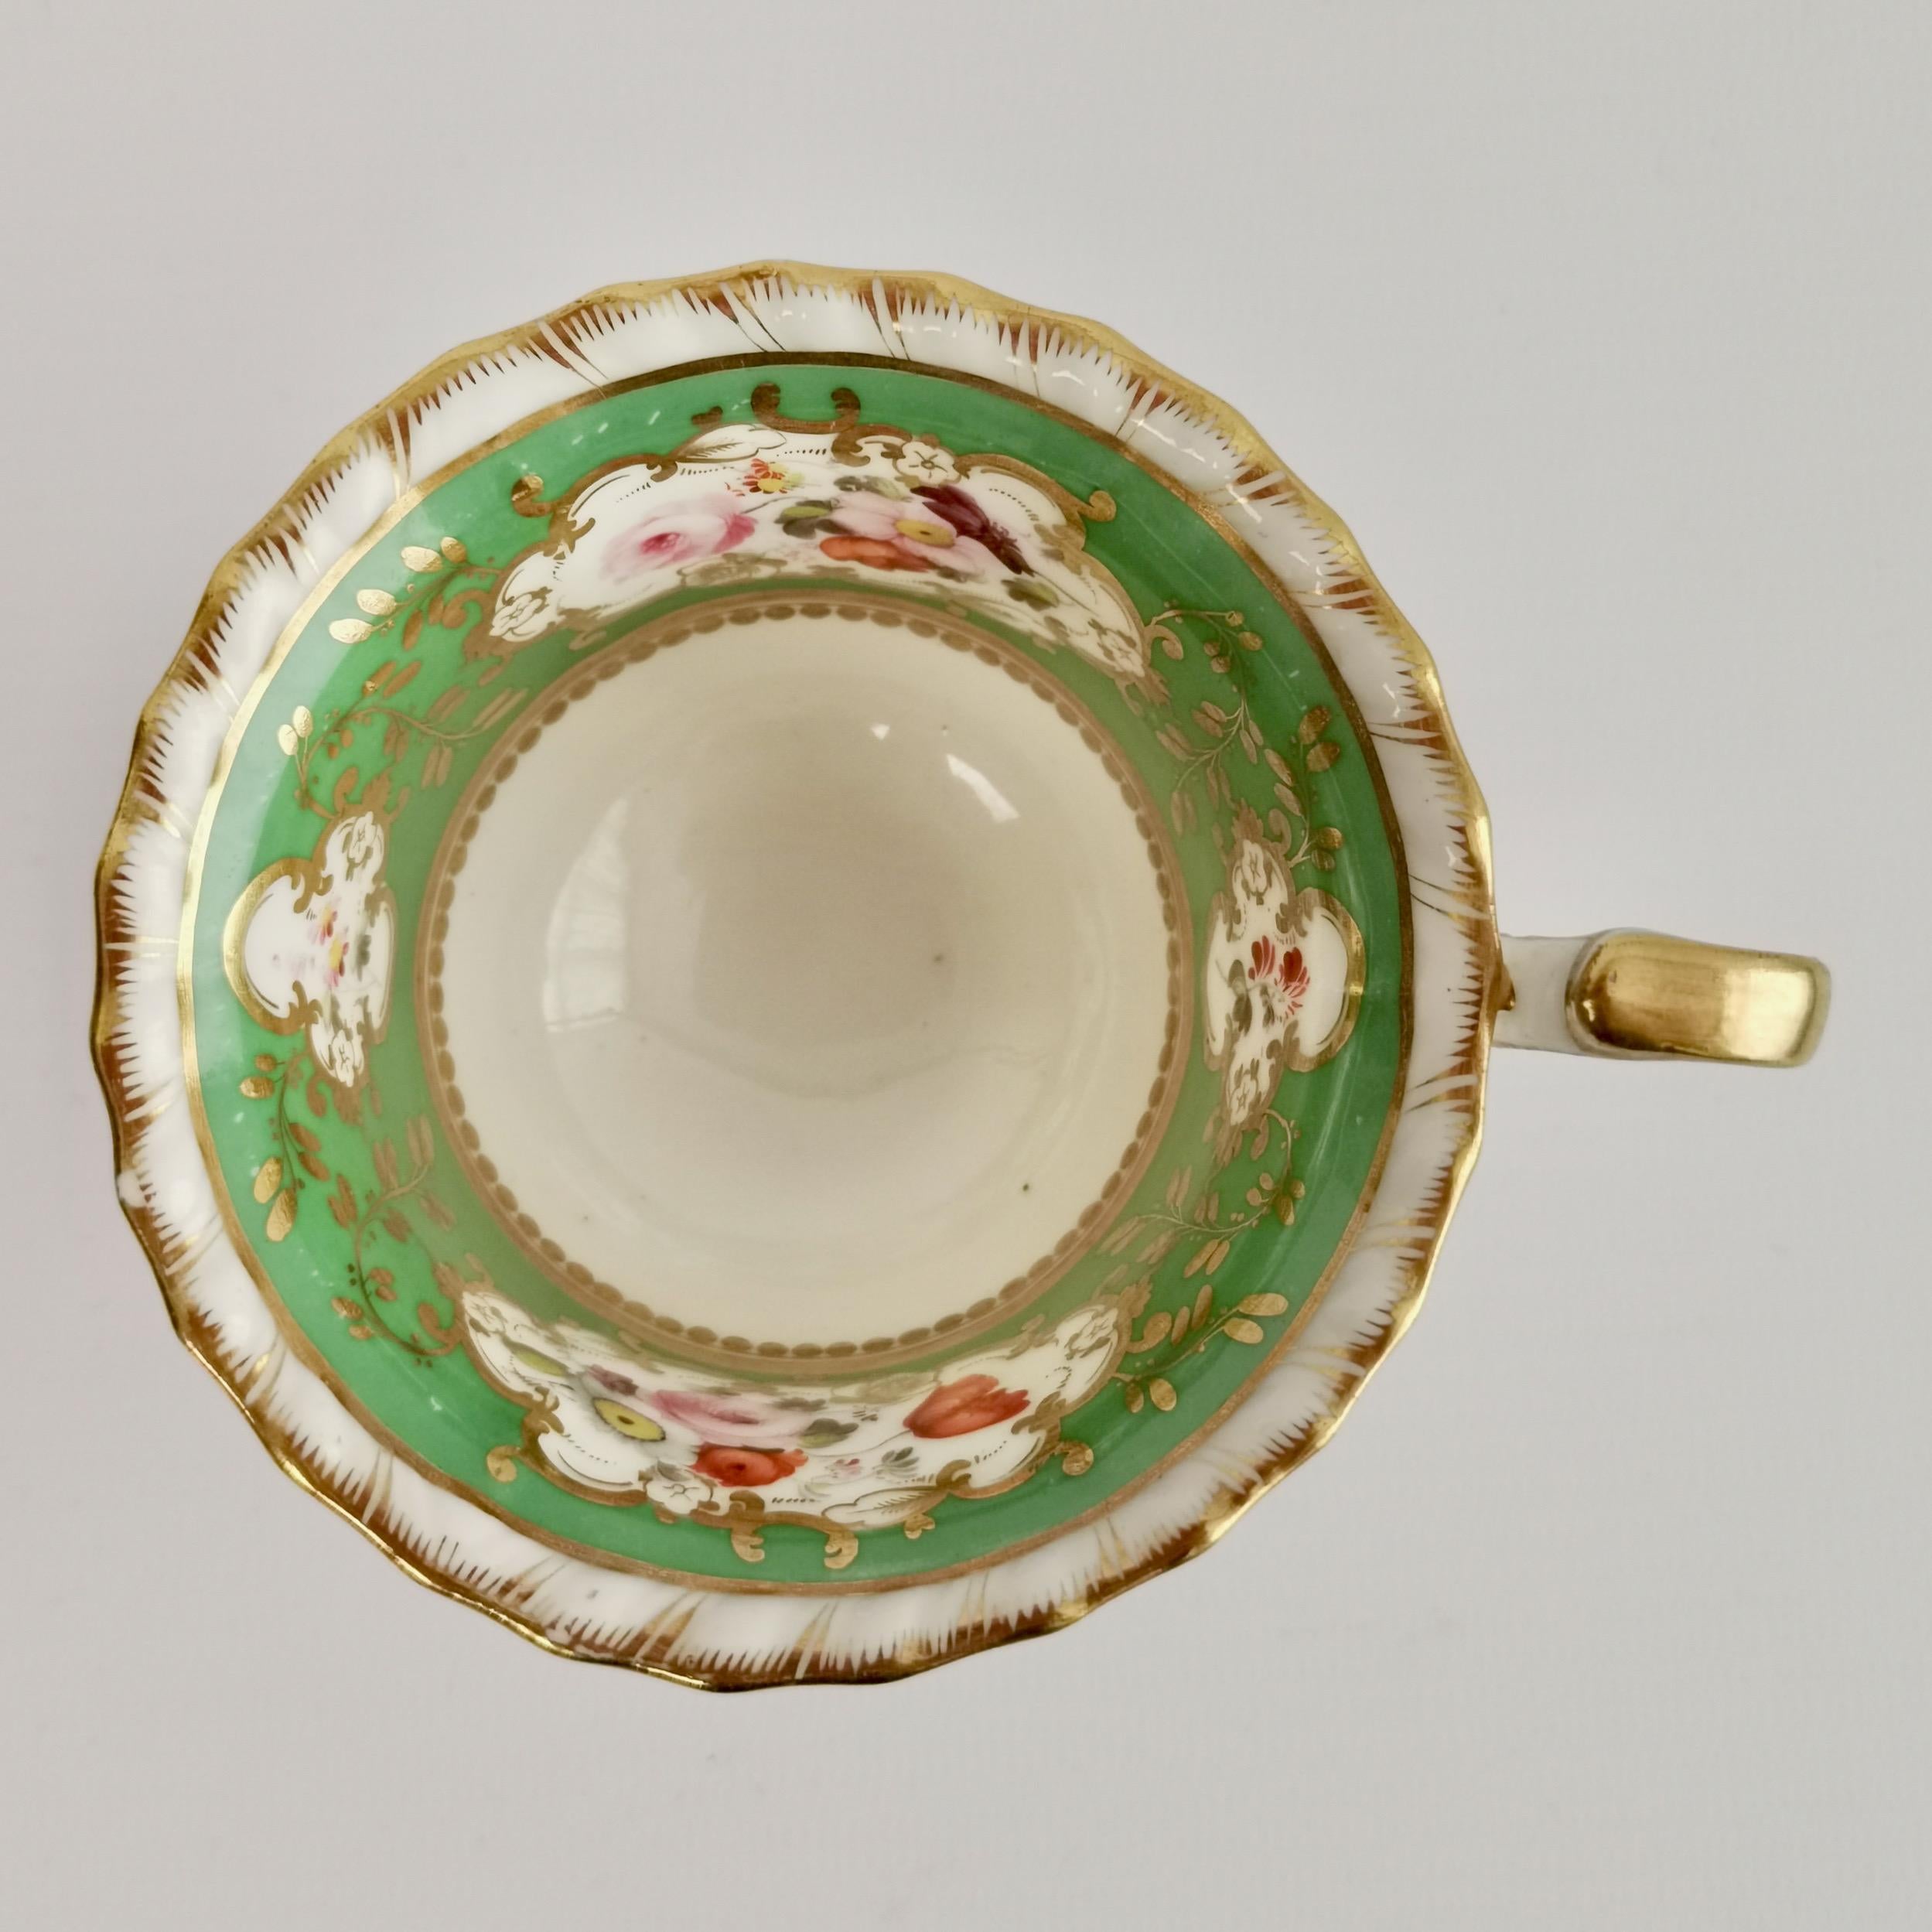 This is a charming orphaned coffee cup made by Minton around the year 1825, which was the Regency era. The cup is decorated with a bright green band and finely painted flower reserves.
 
Minton was one of the pioneers of English china production